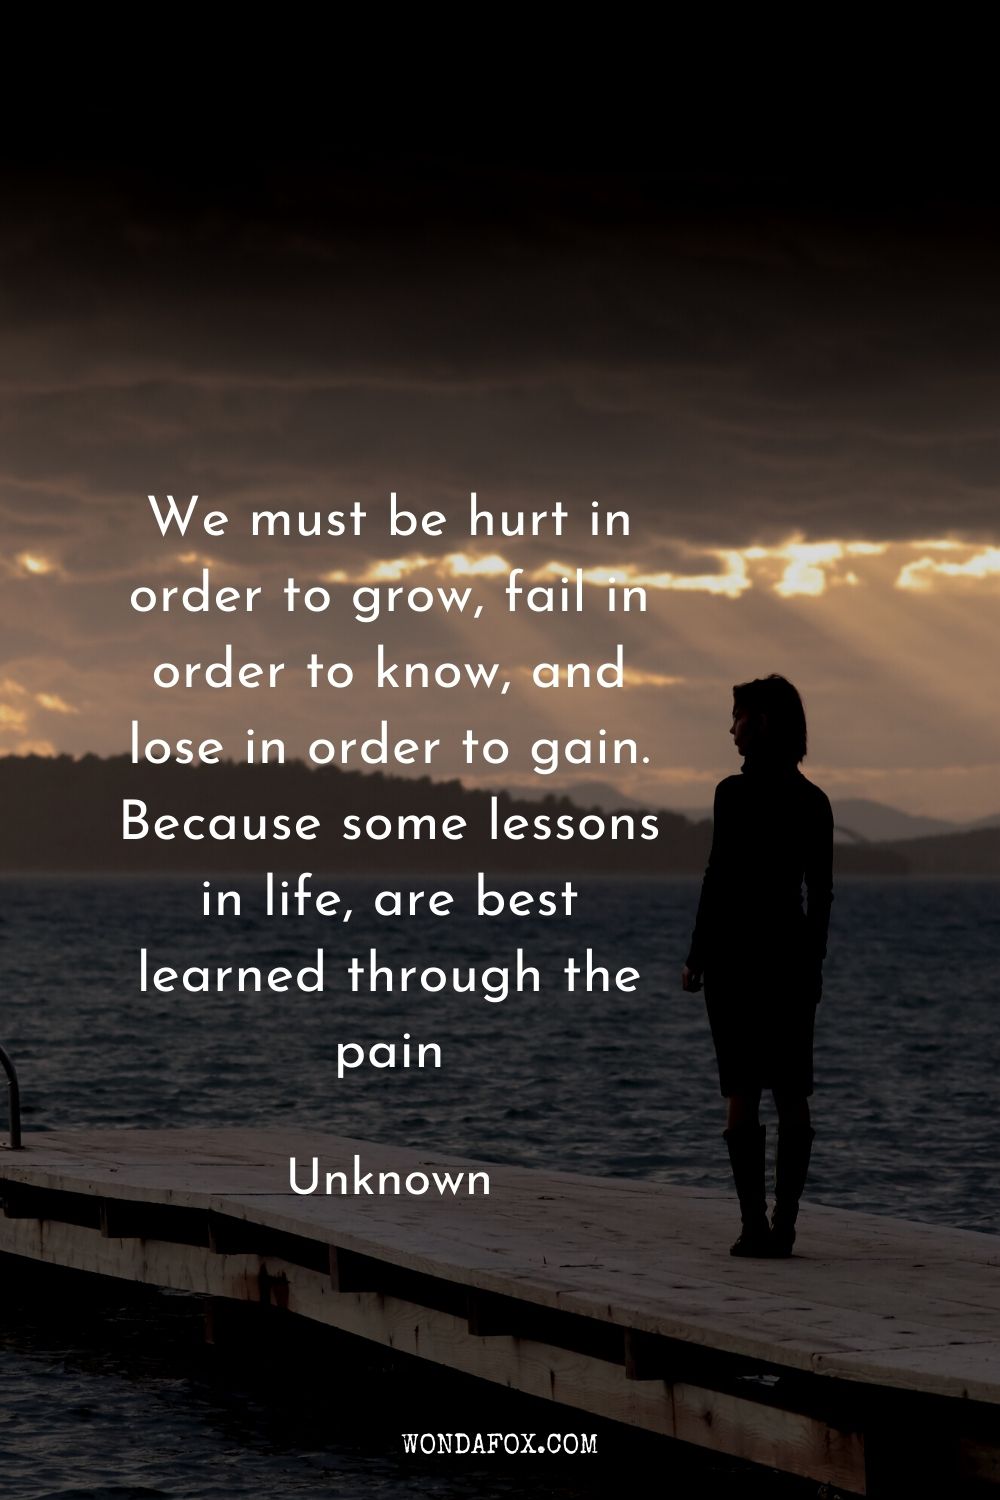 We must be hurt in order to grow, fail in order to know, and lose in order to gain. Because some lessons in life, are best learned through the pain